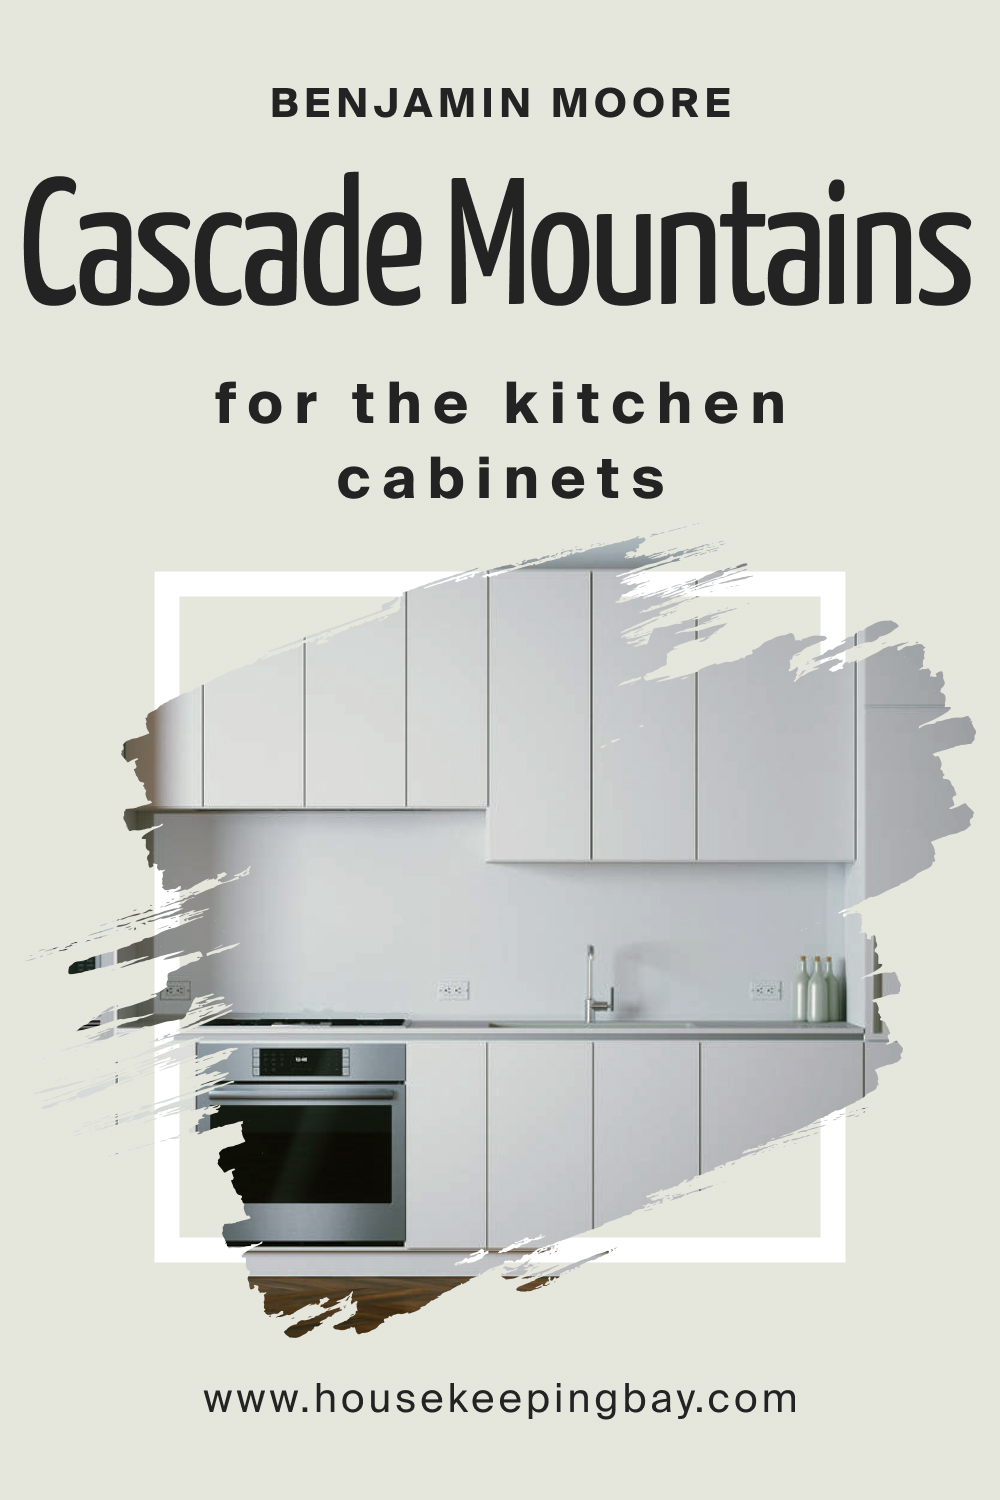 Cascade Mountains 862 for the Kitchen Cabinets